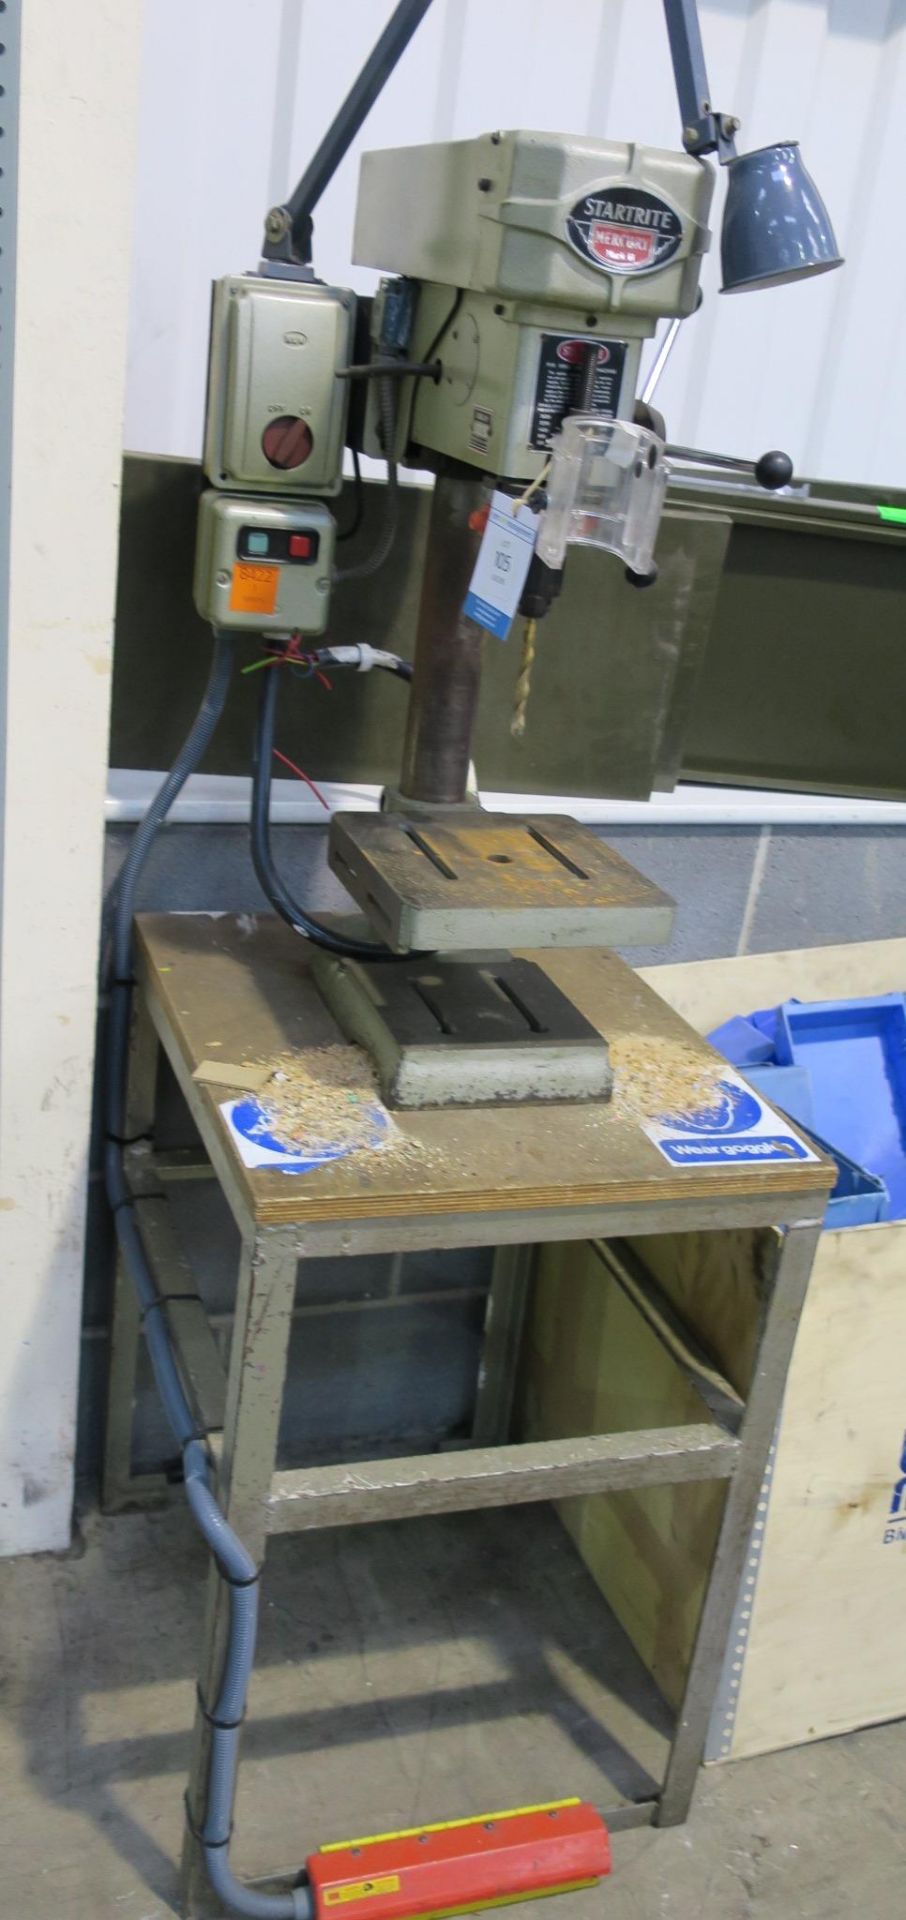 * A Startrite Mercury Mark 2 pillar drill c/w metal stand 3PH. Please note there is a £5 + VAT Lift